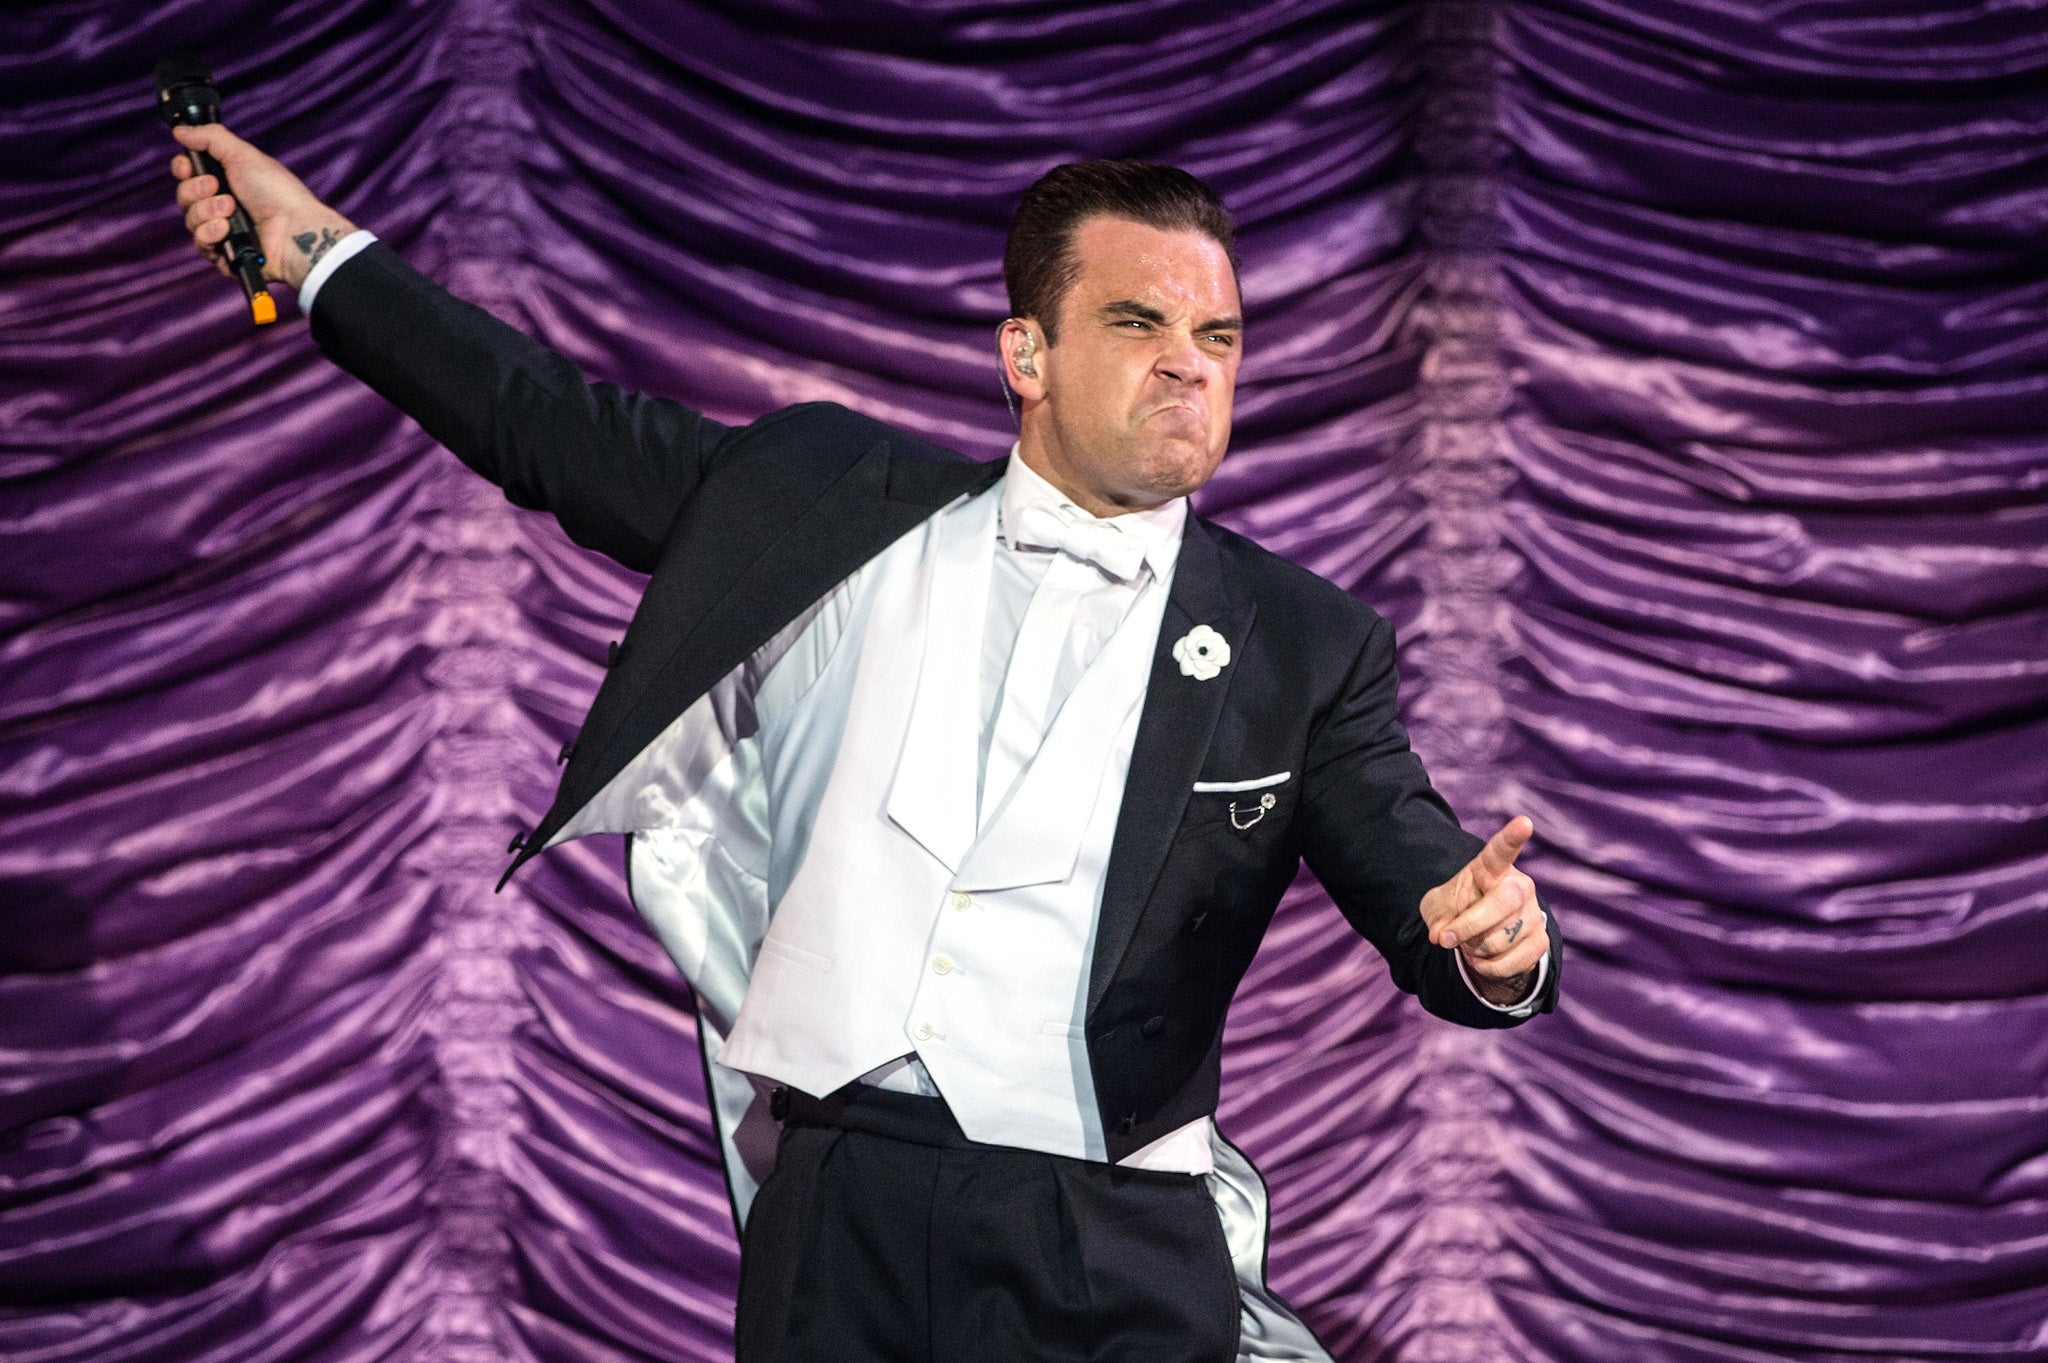 Robbie Williams performs during his 'Swing Both Ways' World Tour